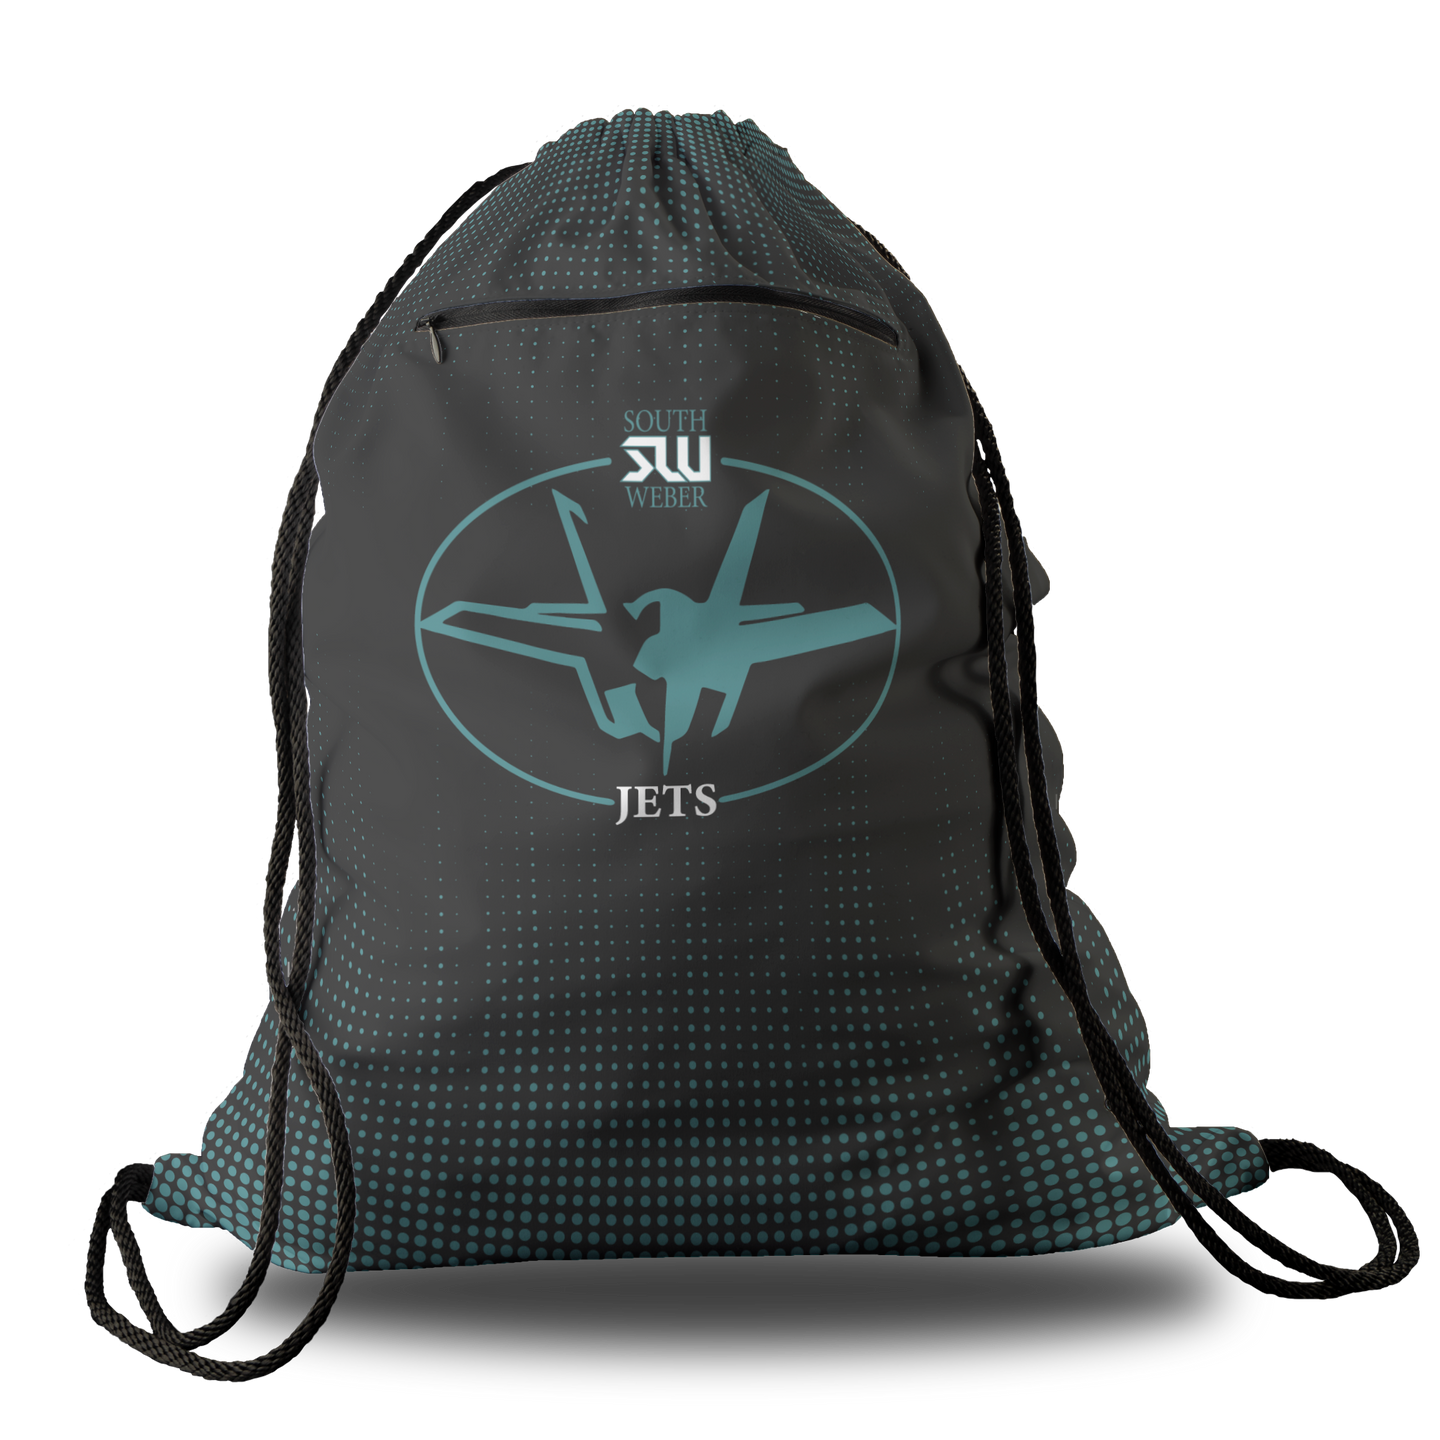 Jets Oversized Premium Cinch Bag with Zip Pocket and Personalization